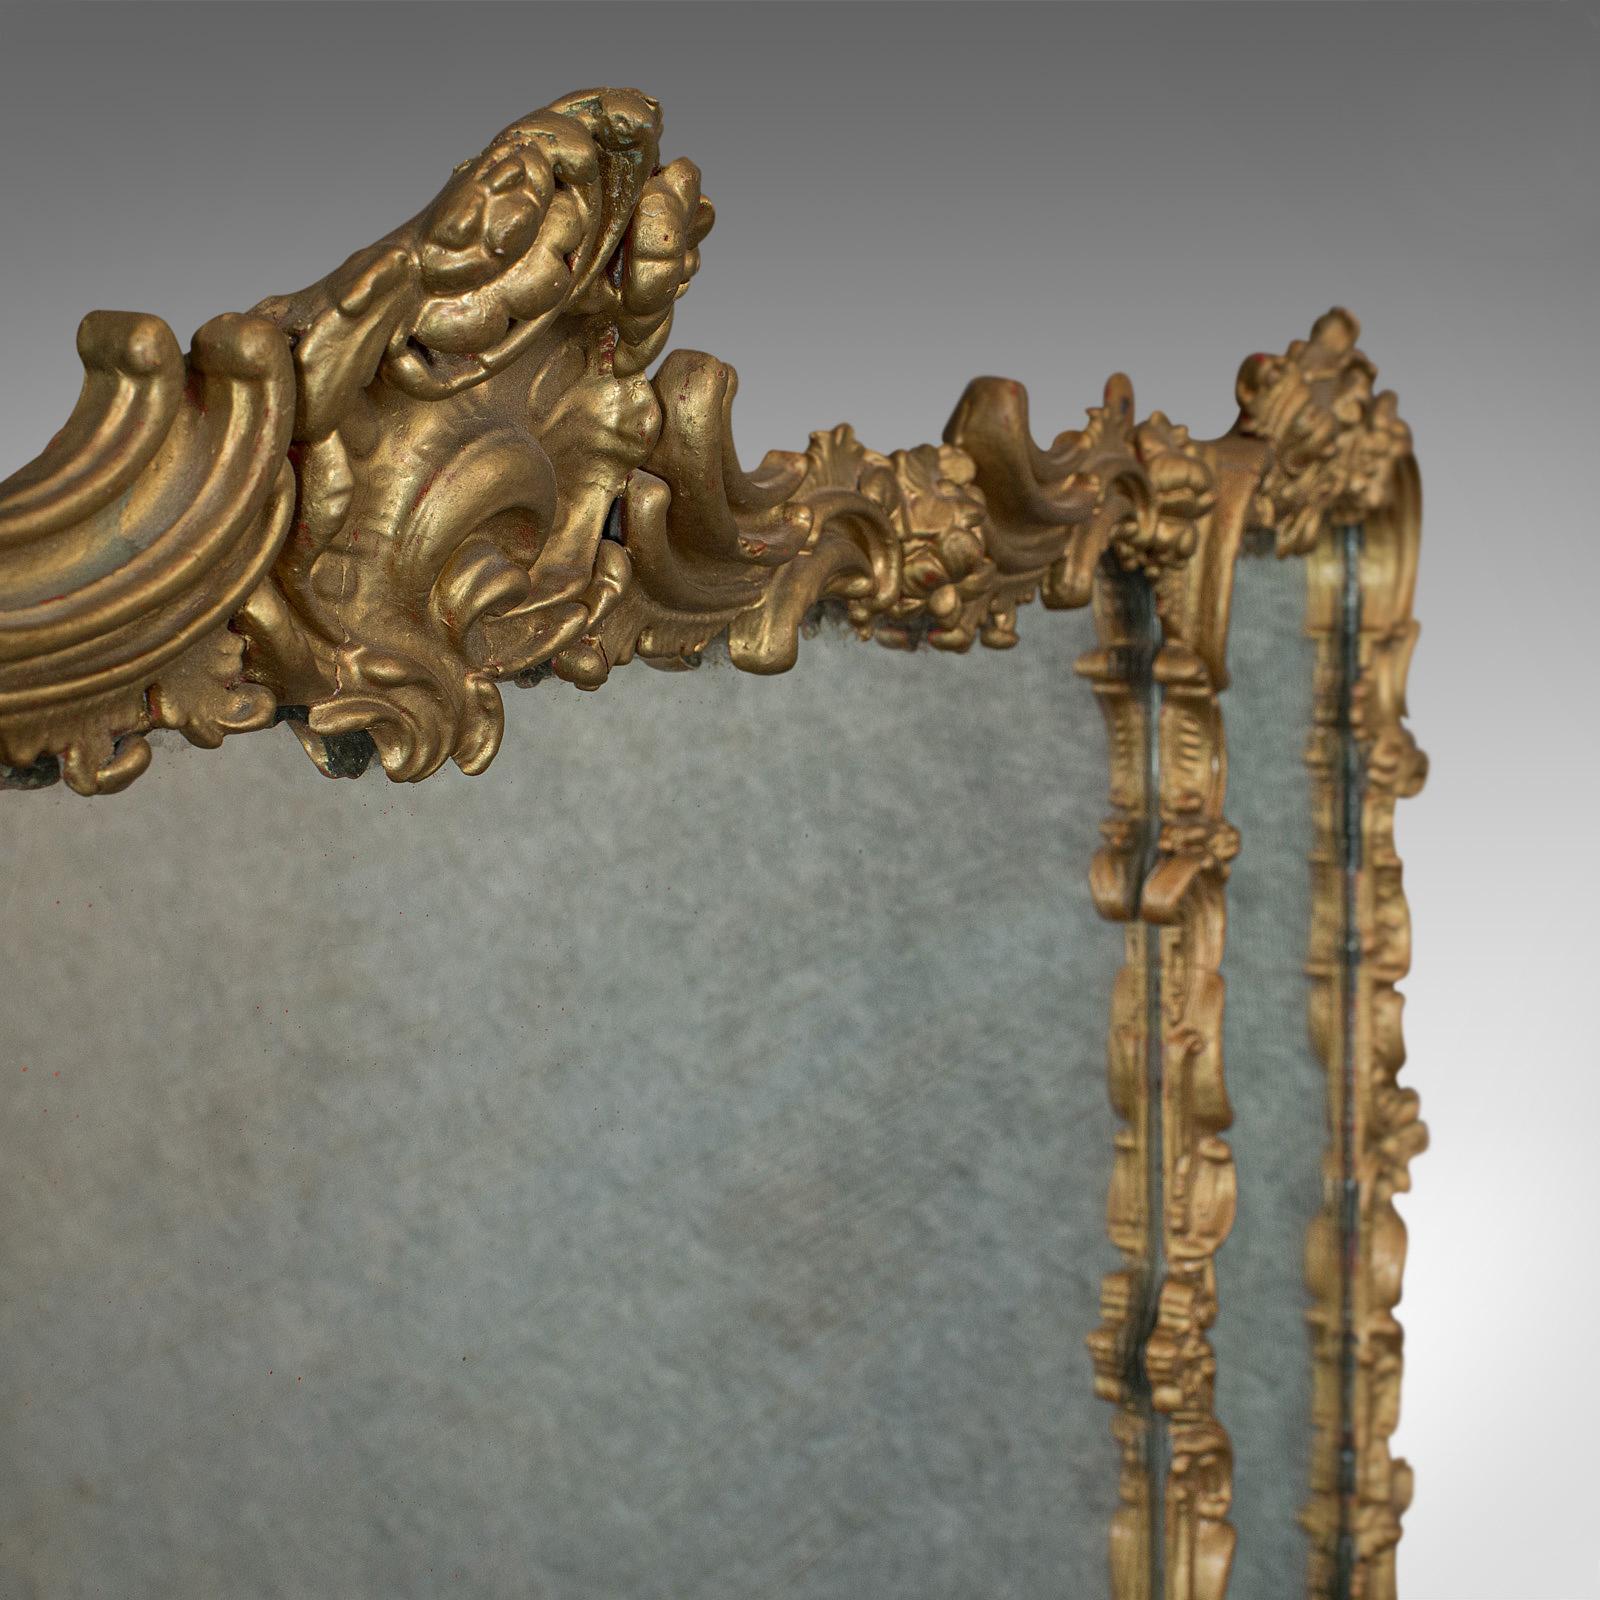 Early Victorian Antique Triptych Mirror, Italian, Gilt Gesso, Overmantle, Hanging, circa 1850